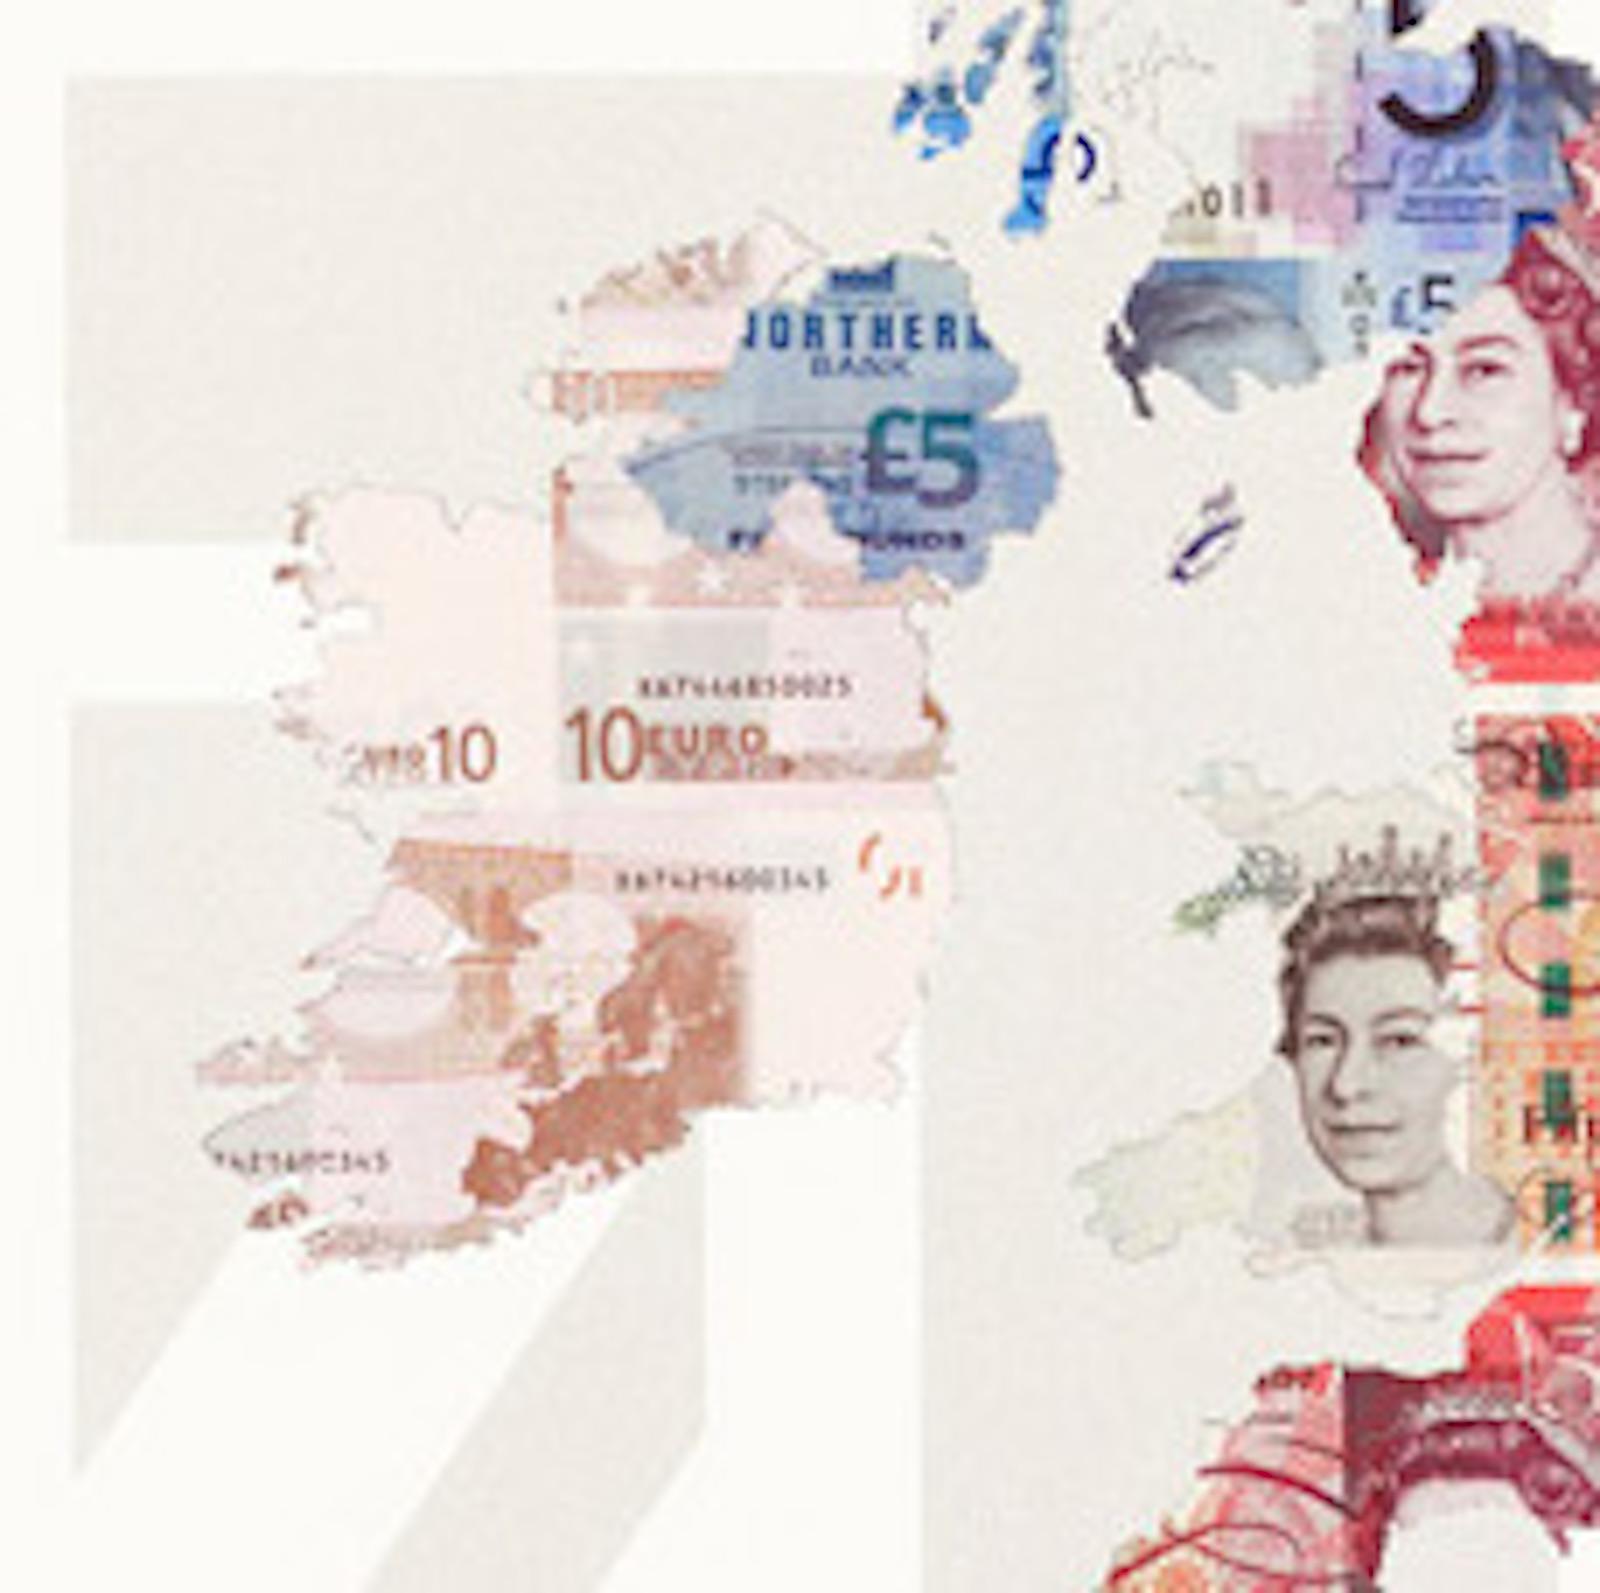 Great Britain is a limited edition geographical print with pearlised screen print detail by Justine Smith. This artwork is prints onto 330gsm Someset satin paper. The use of different currencies to make up the map allows for a politically charged